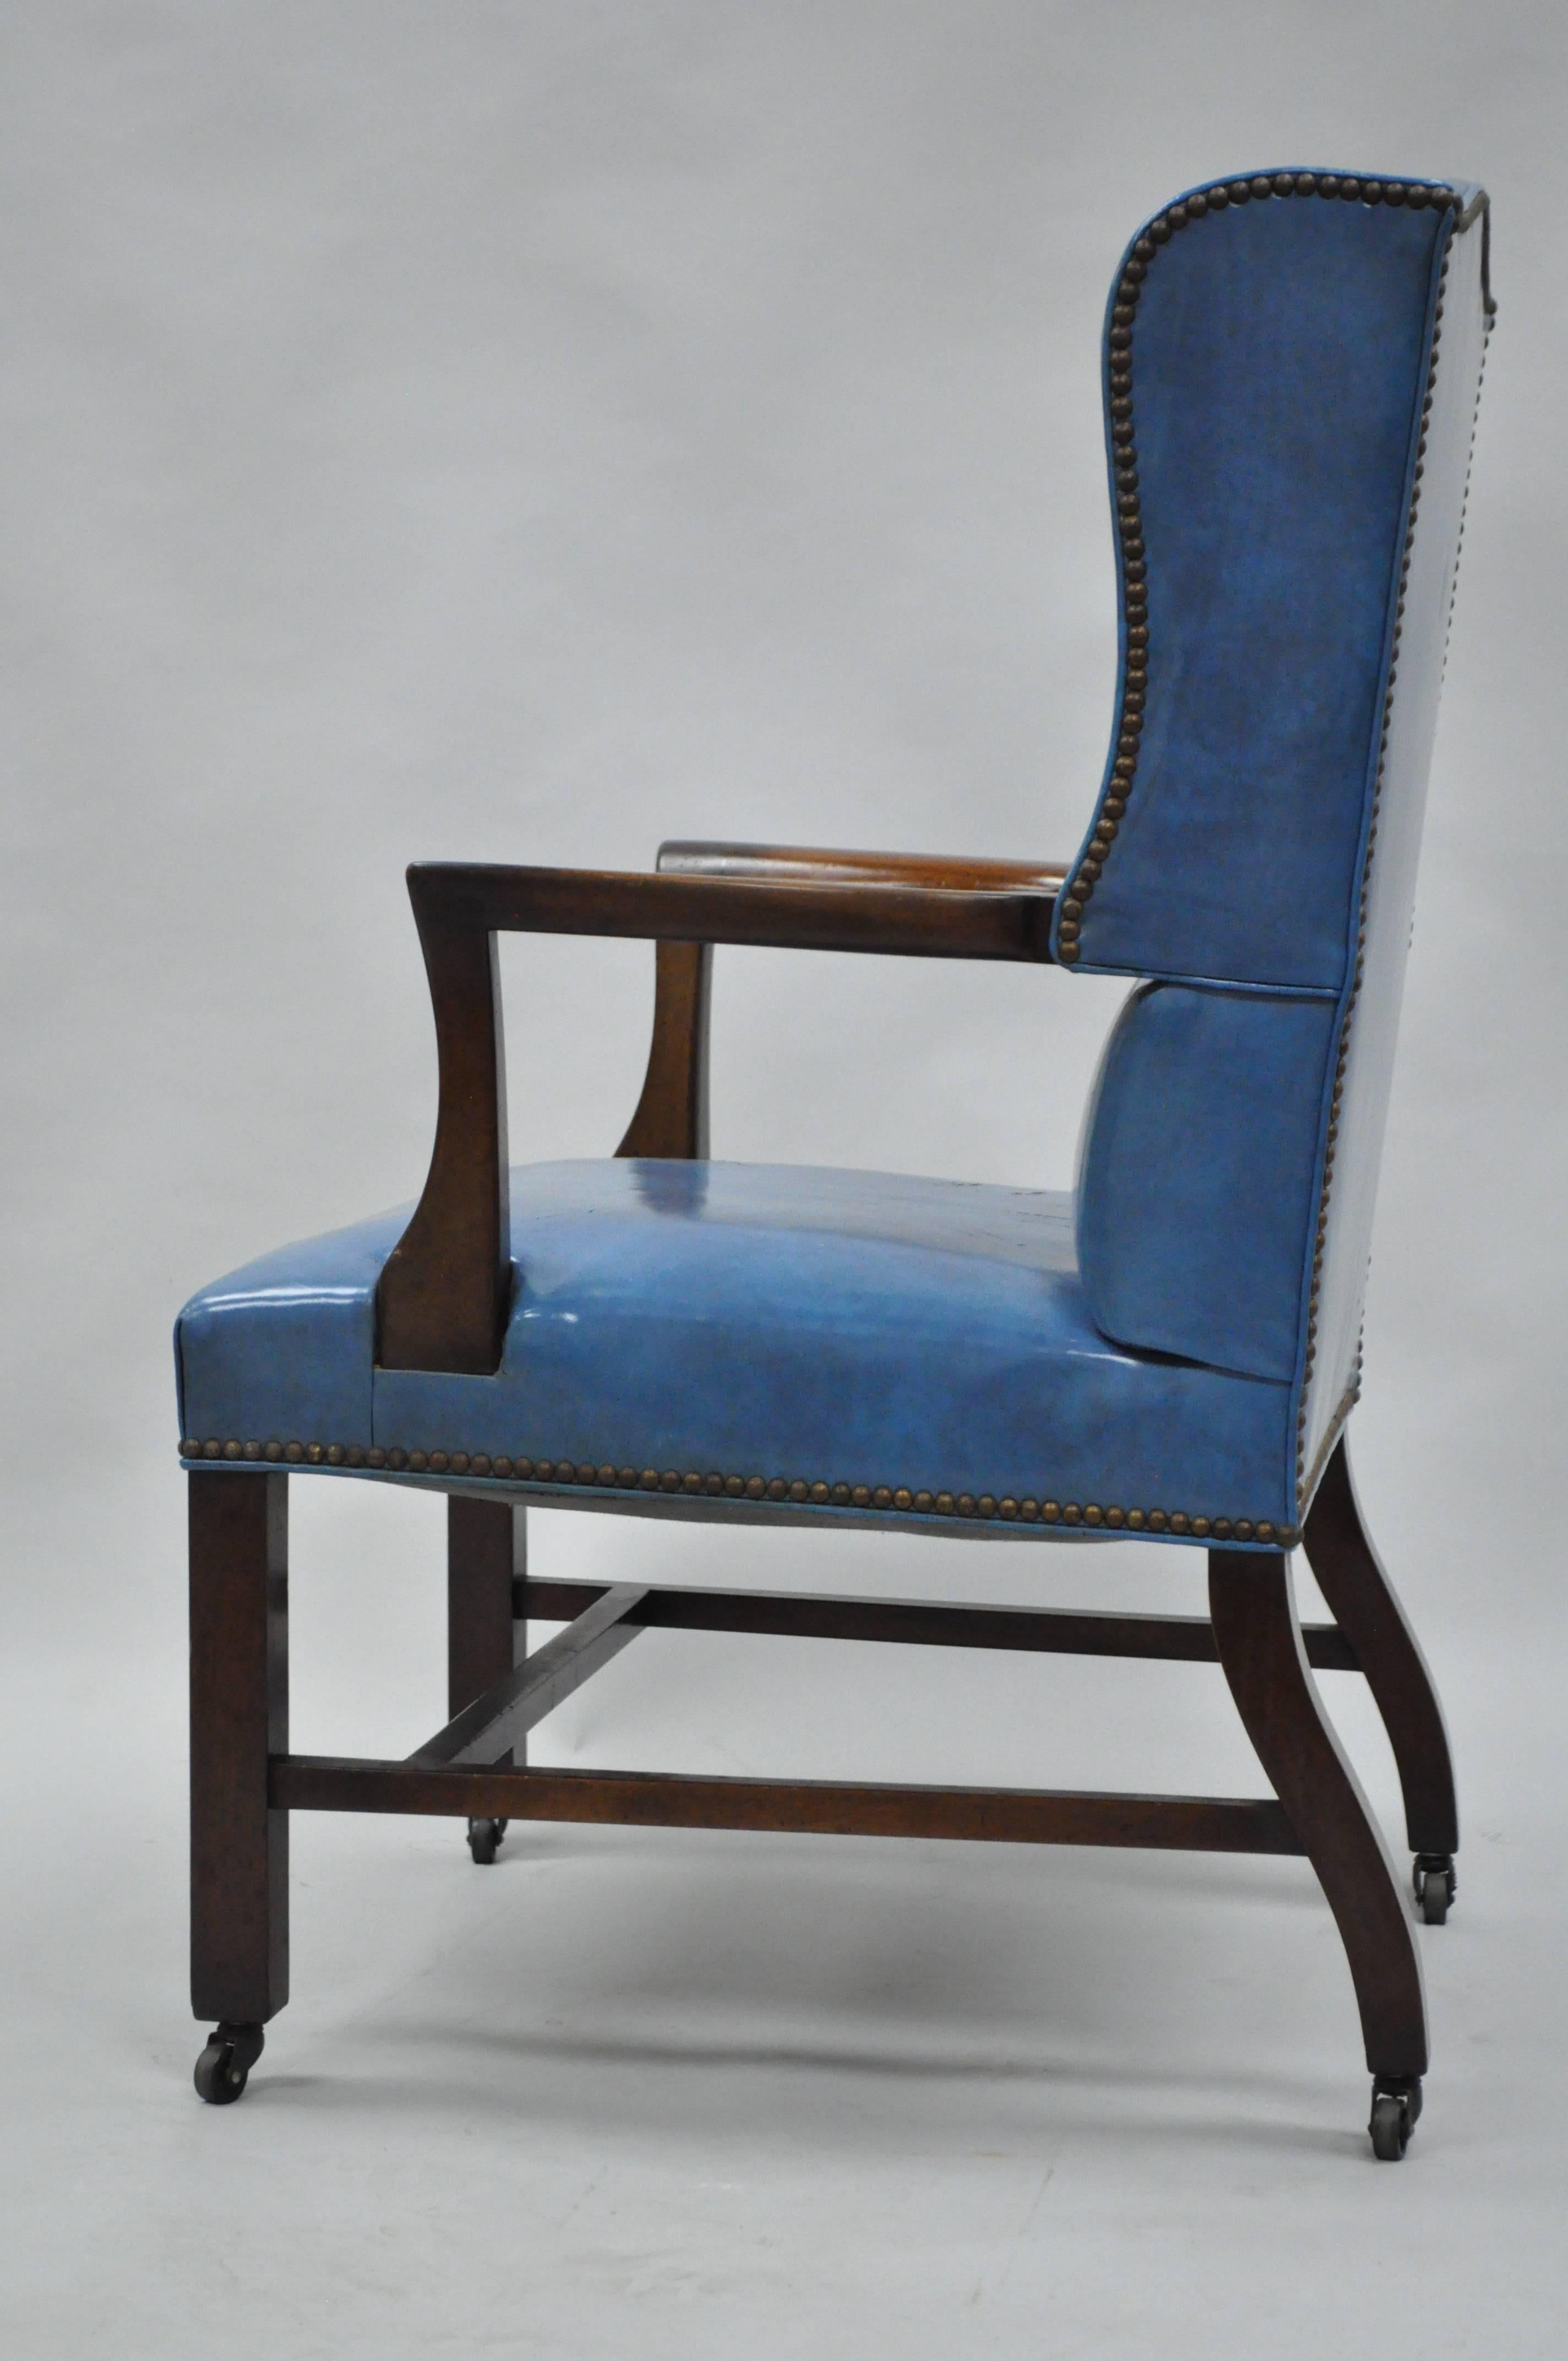 Georgian Blue Leather Mahogany Sloane Office Desk Library Wing Chair After Edward Wormley